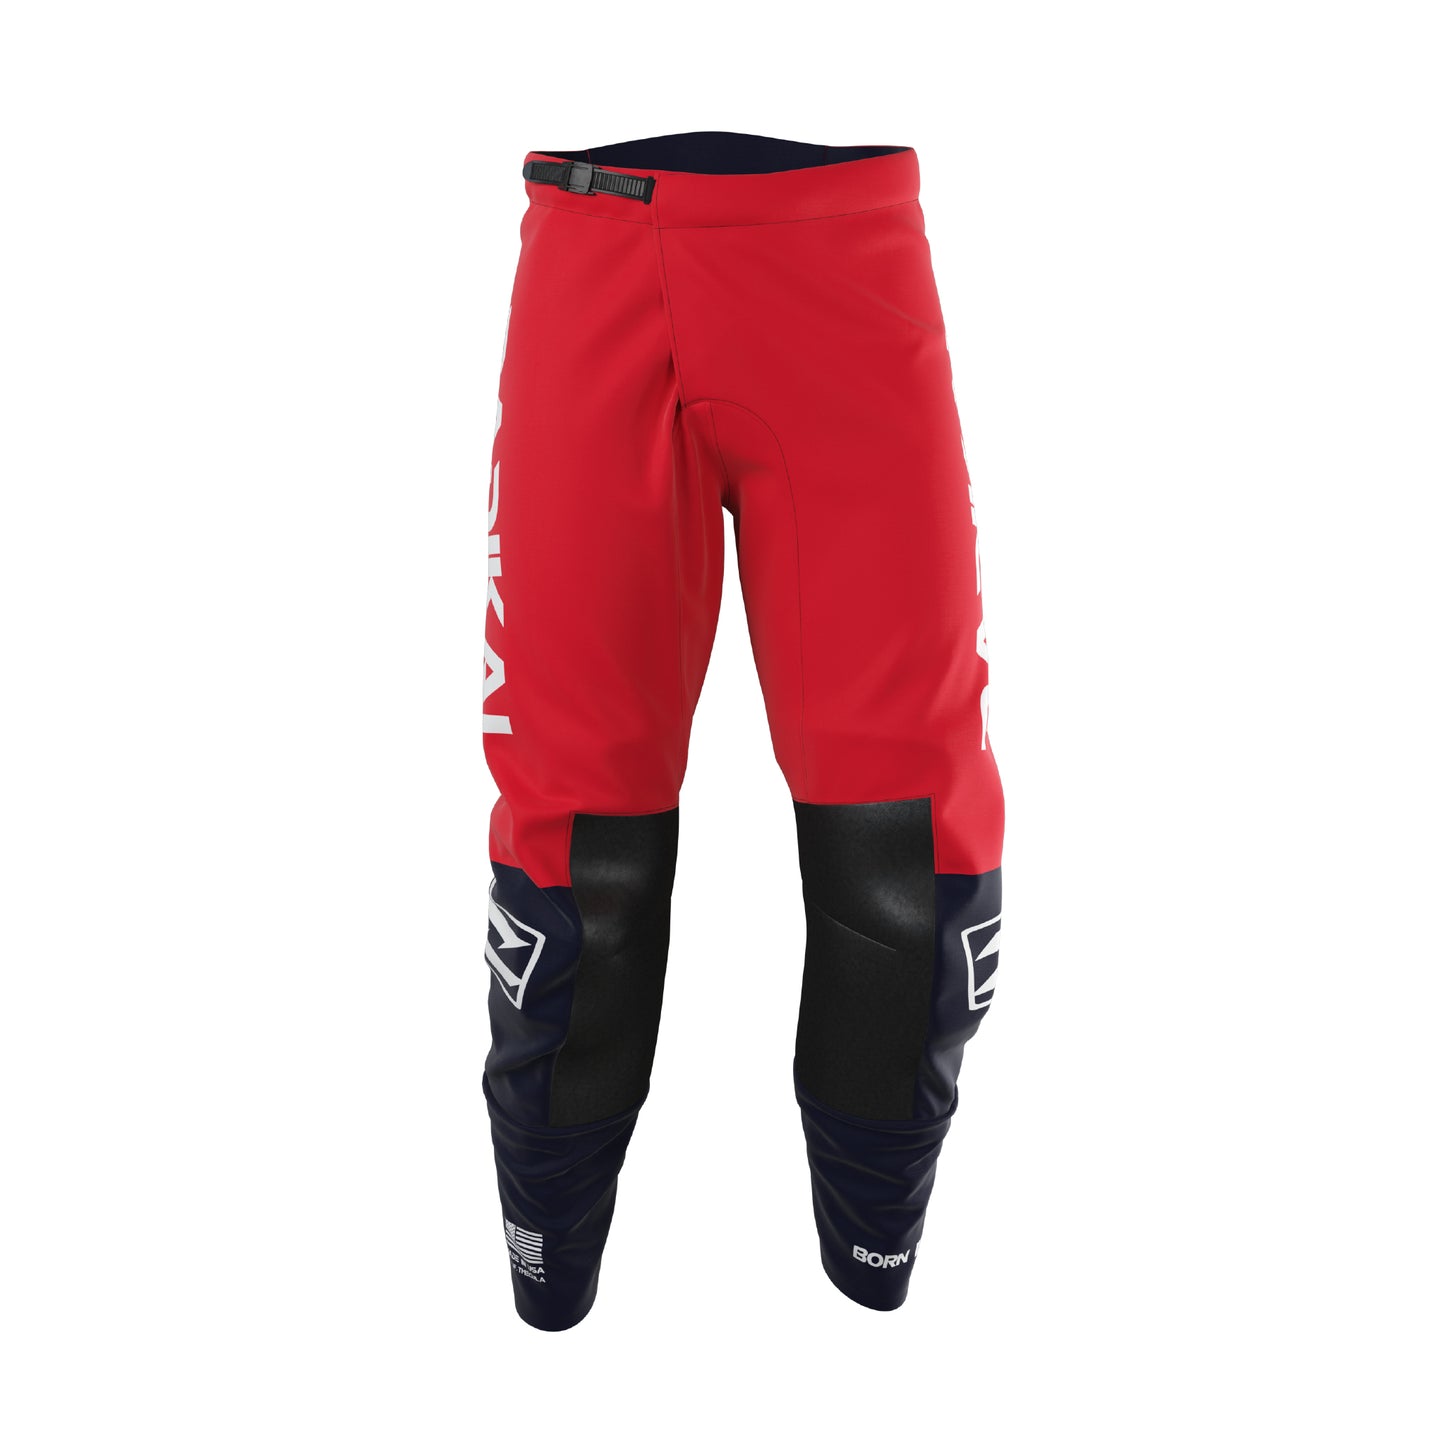 FLUX SERIES RED BLUE PANT